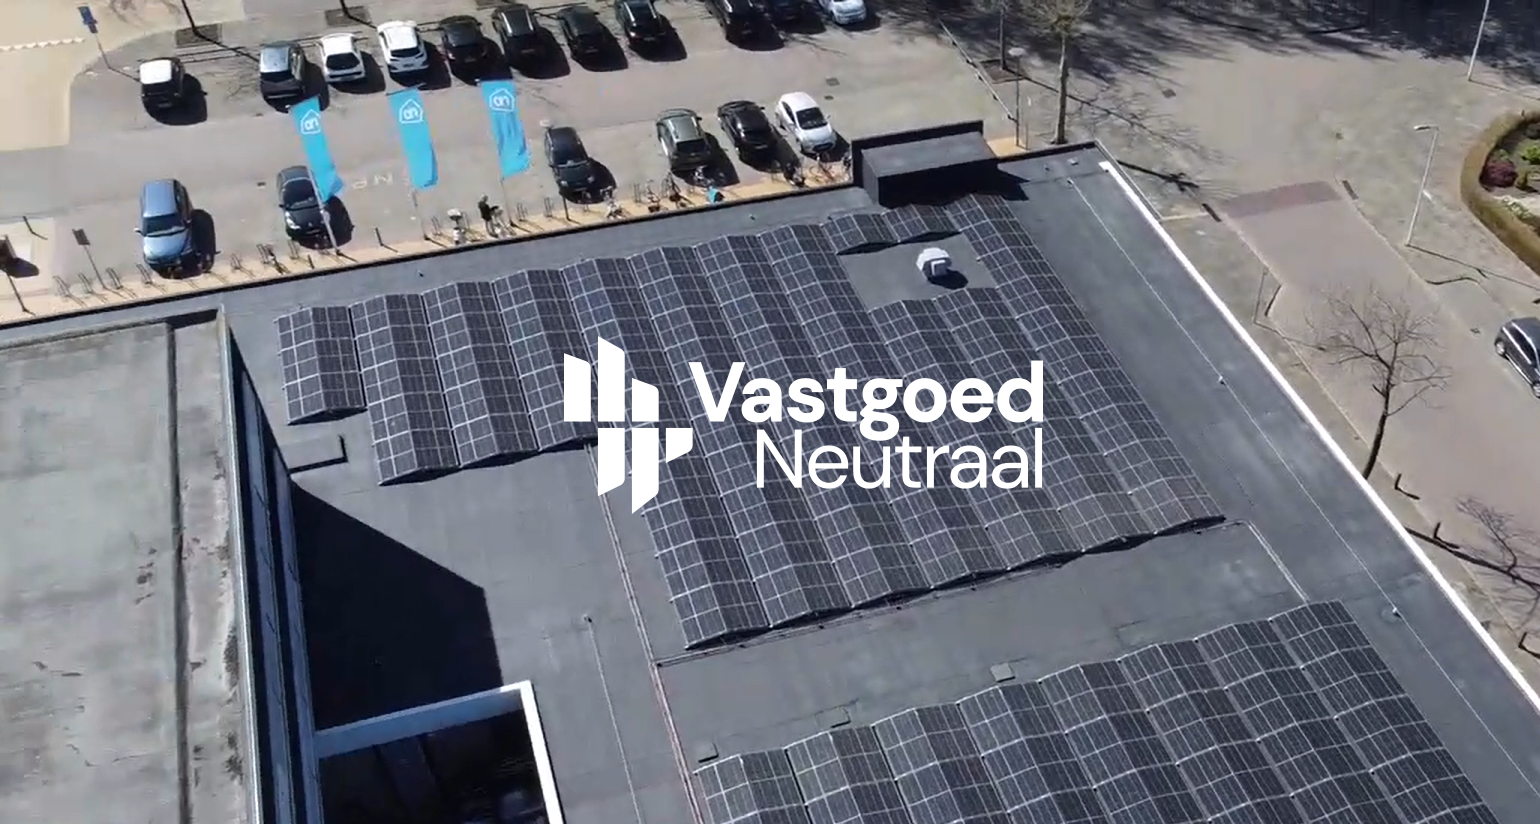 Proprli and VastgoedNeutraal join forces to provide all-in-one service for Carbon Pathways towards Net Zero